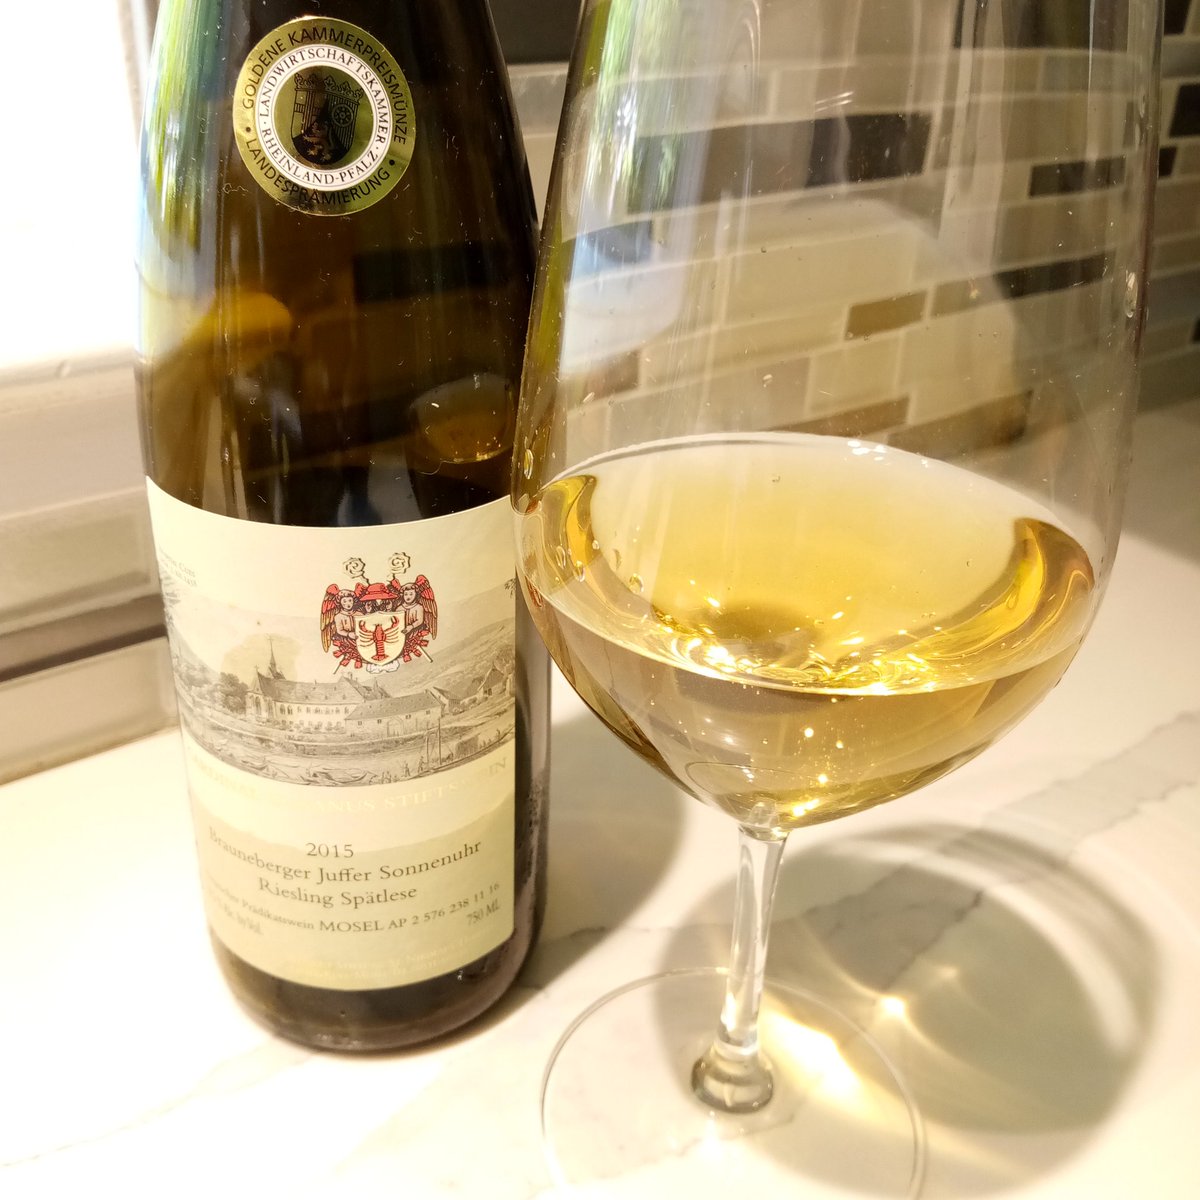 Grown on a 60 to 70% grade of Devonian Slate. Everything is done by hand. Honeyed, yellow peach, cinnamon and ripe pineapple nose. Long silky finish. A wonderful Sunday sipper. @grapelive @RussellVine1981 @SuzyQlovesWine @FoodieWineLover @WinesofGermany #Mosel #wine